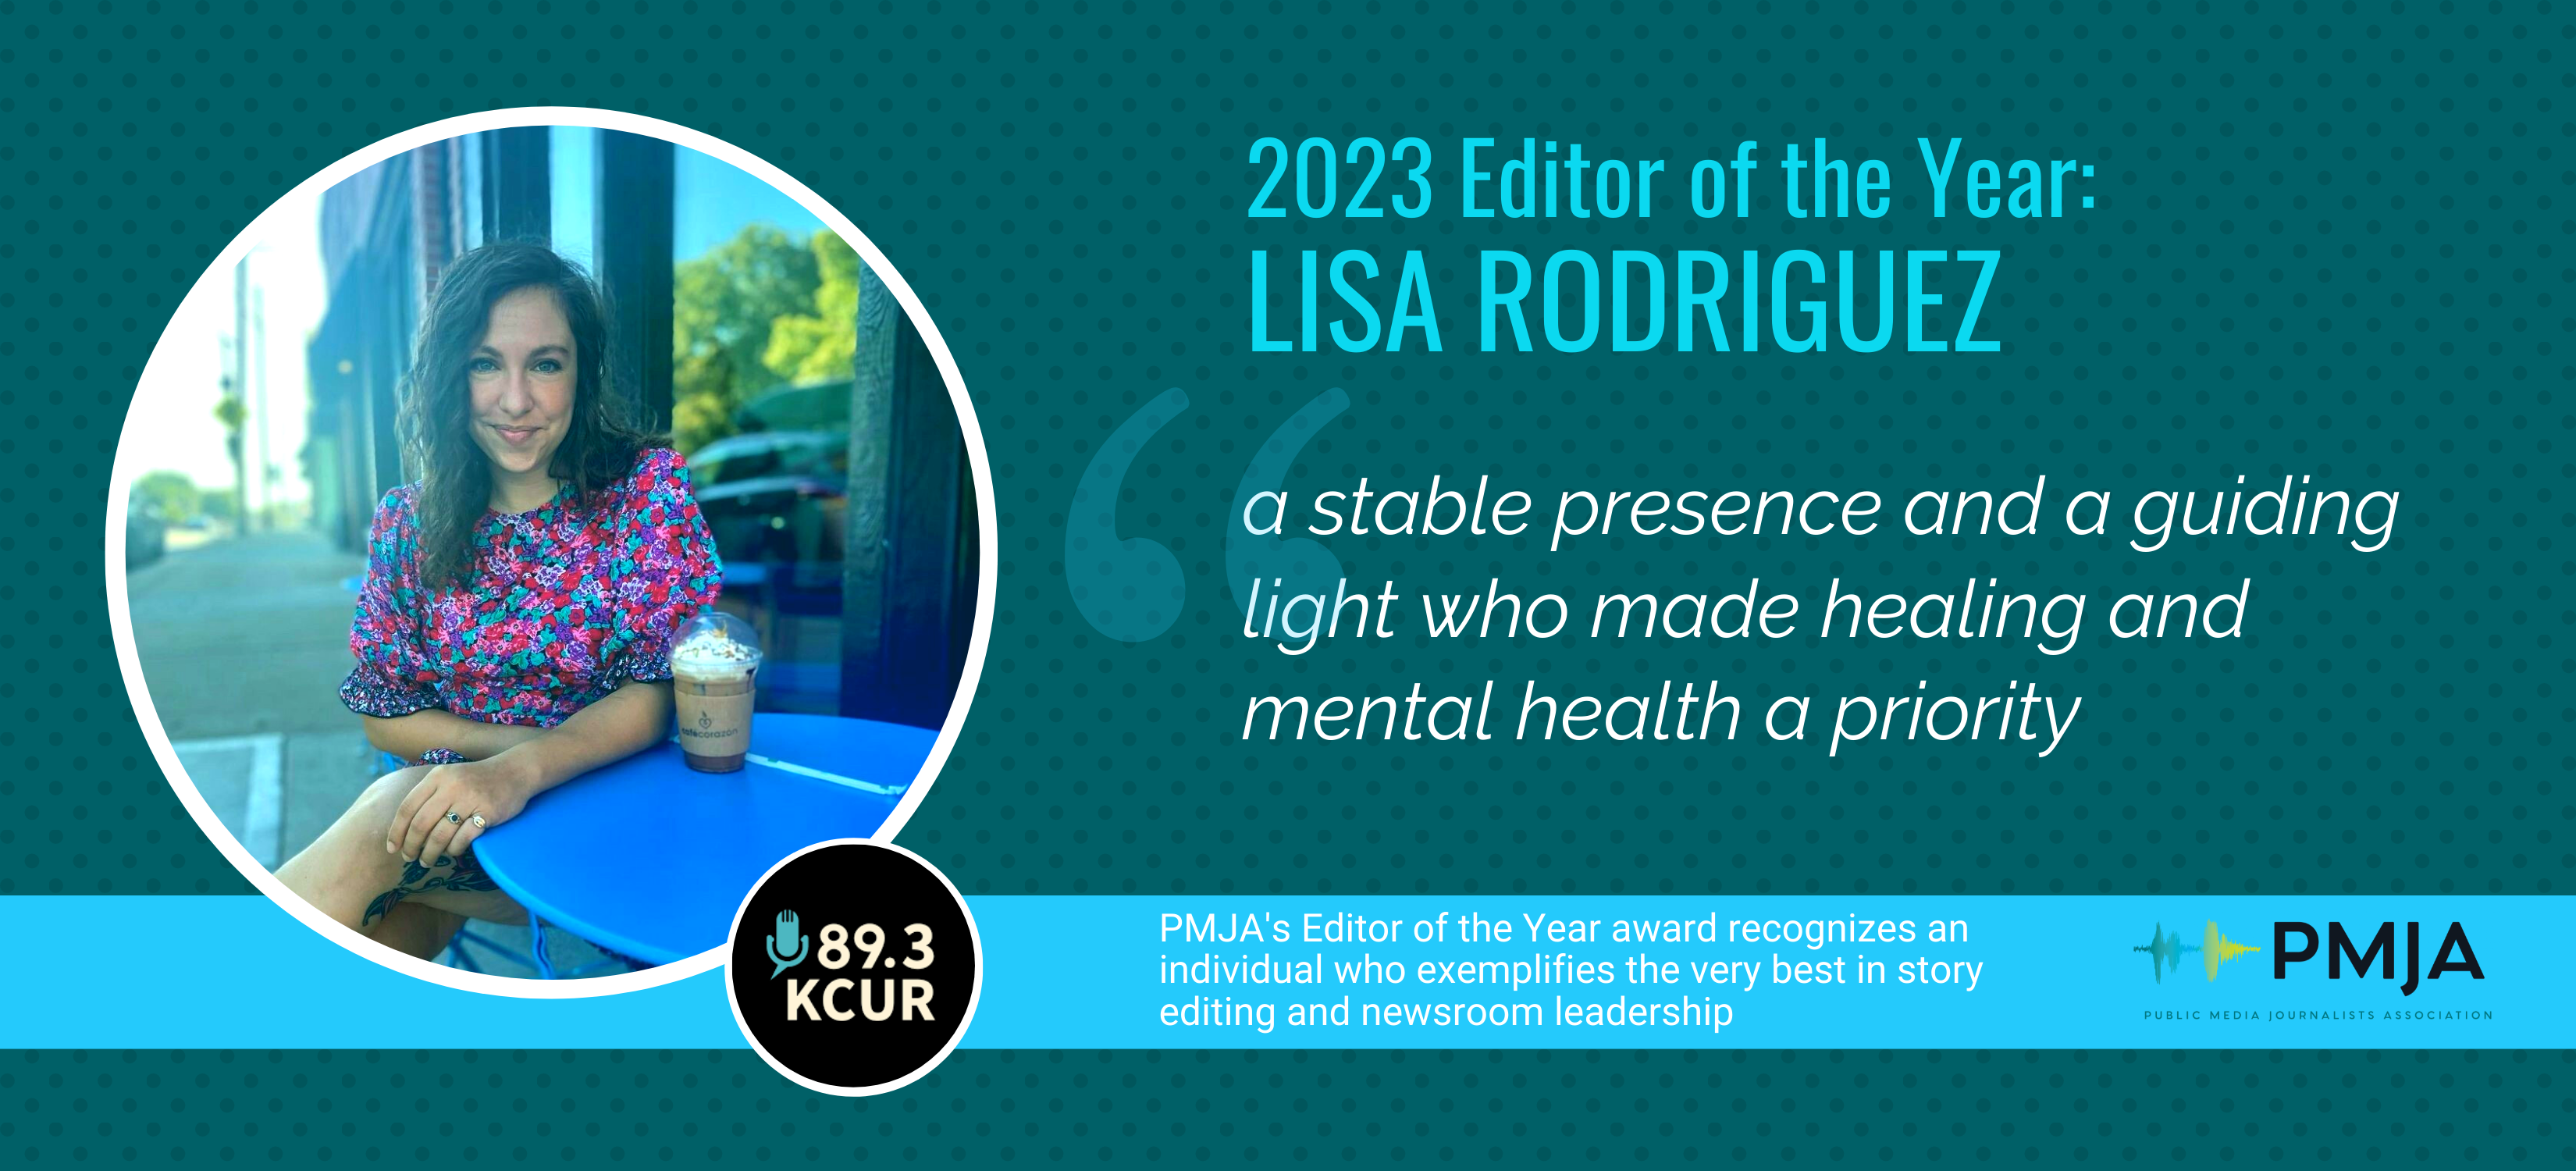 Lisa Rodriguez named Editor of the Year